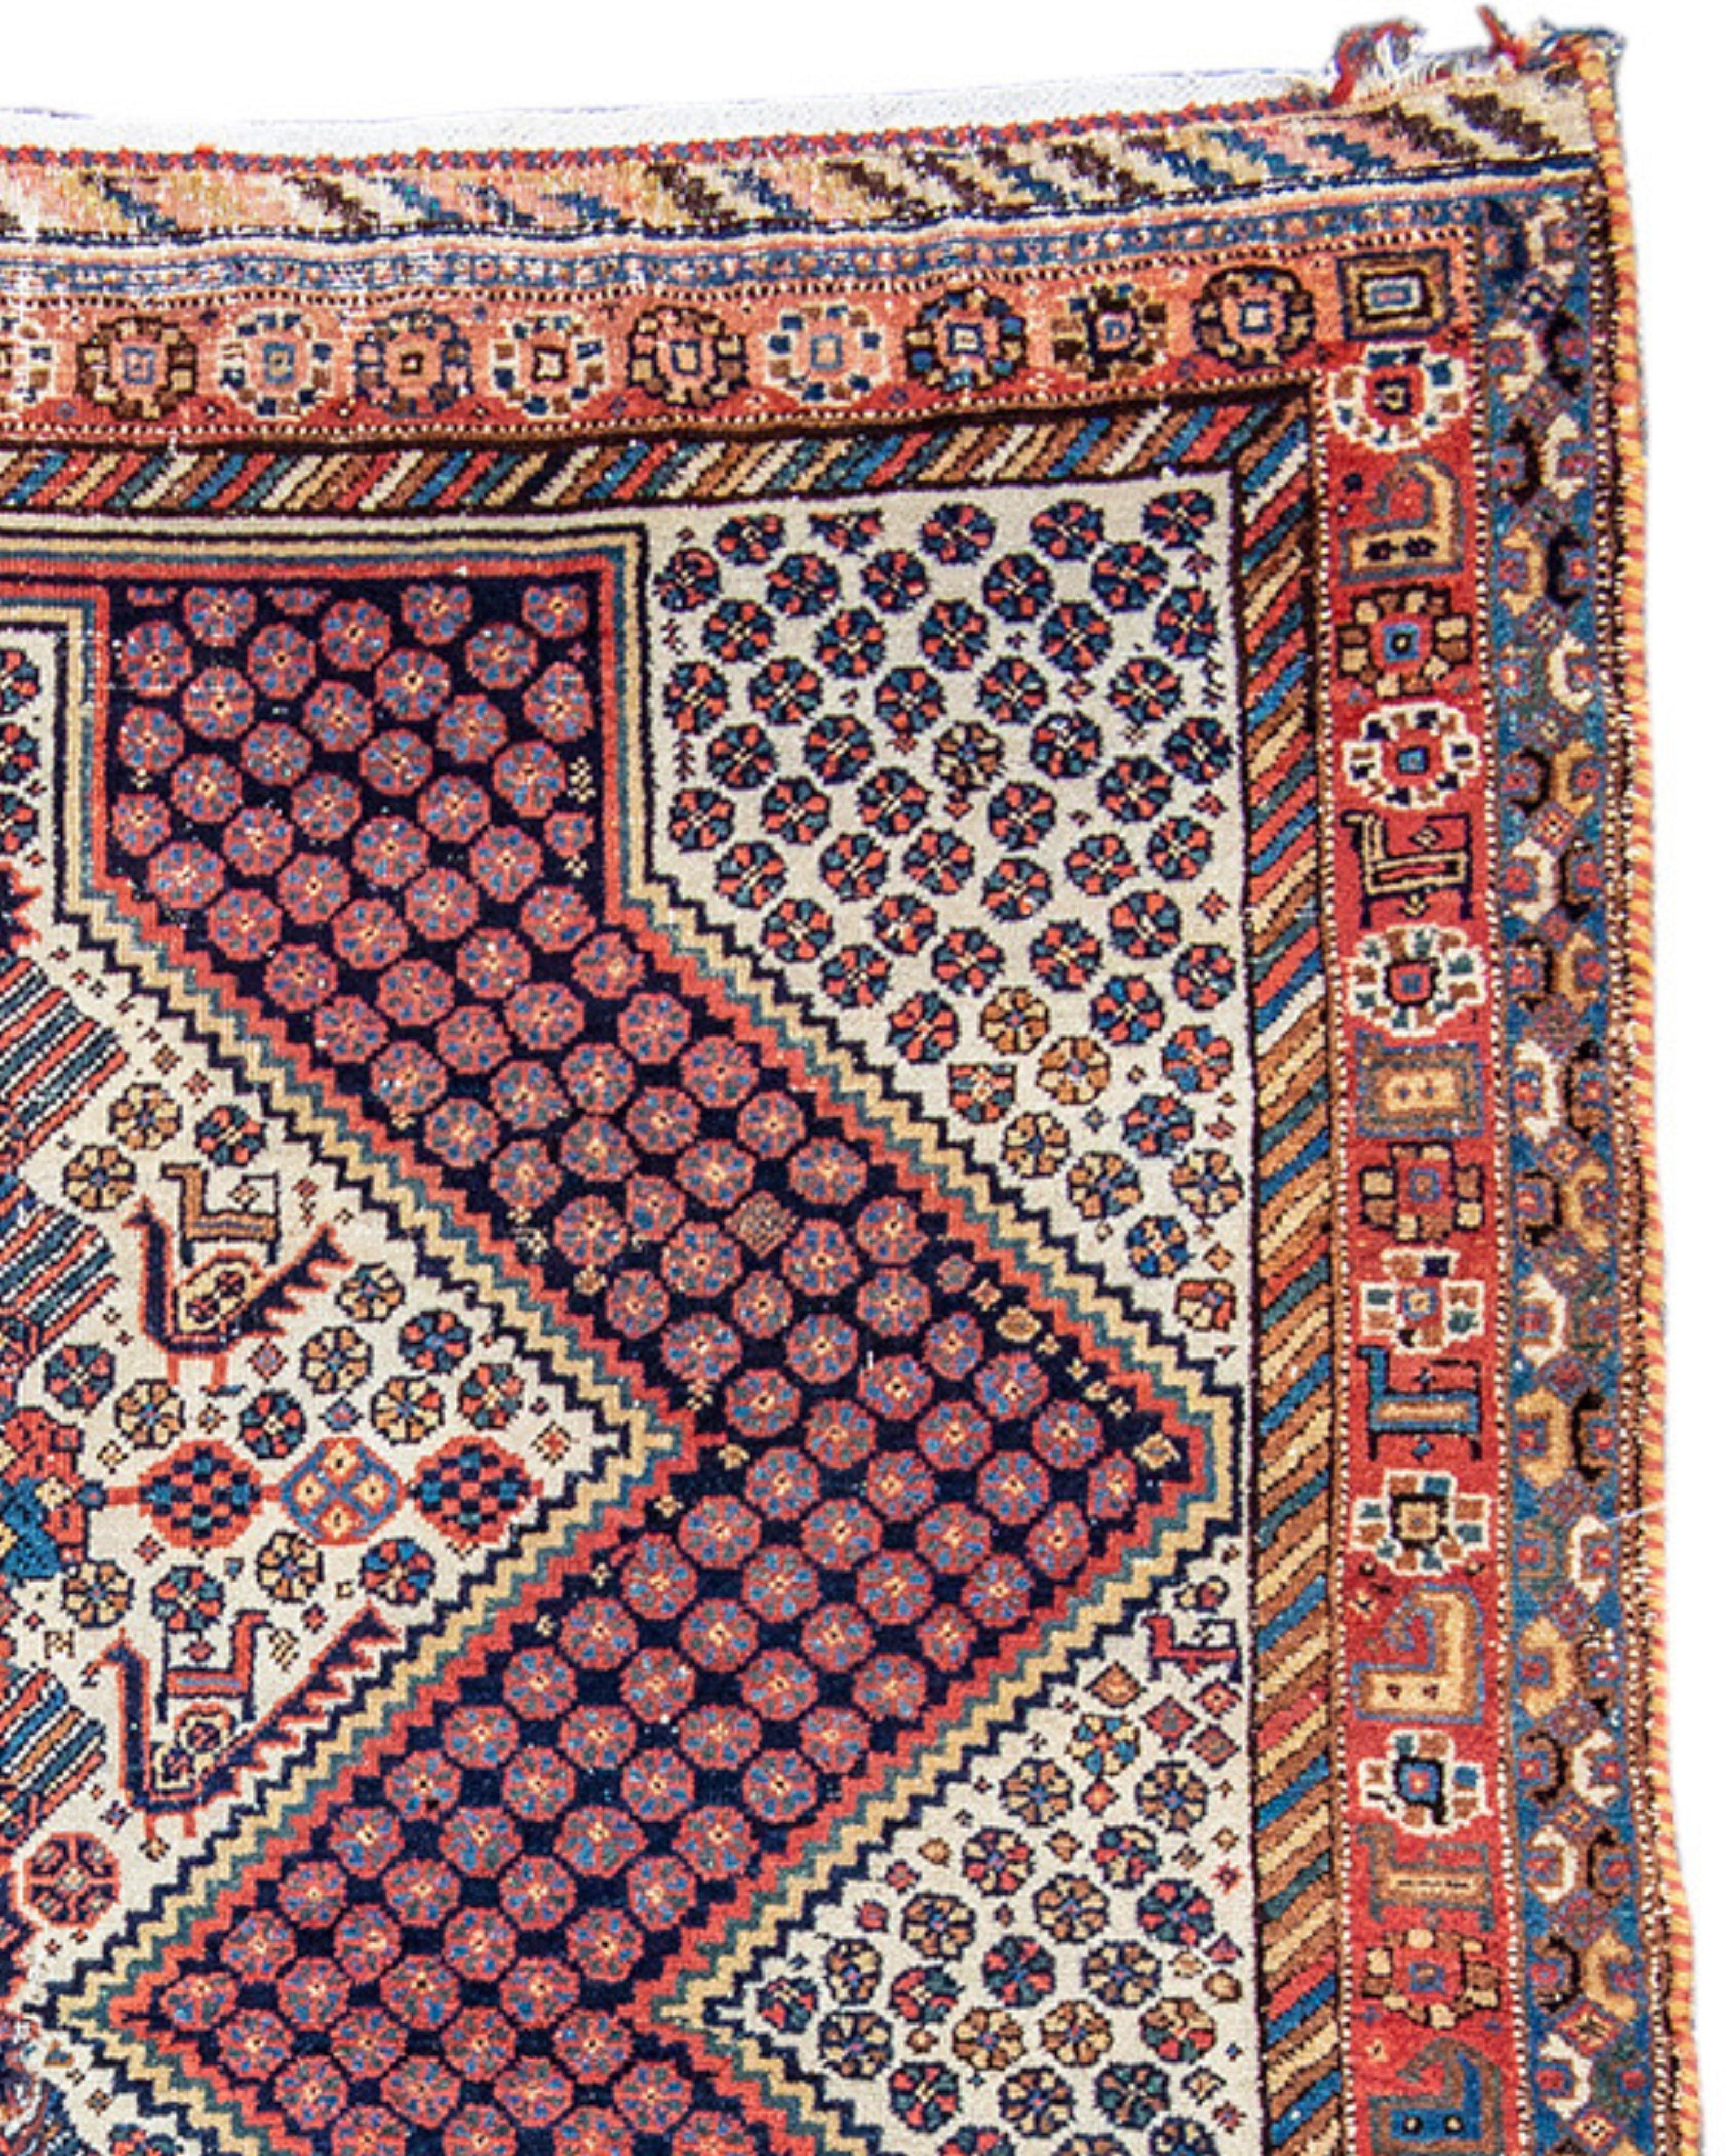 Antique Persian Luri Rug, 19th Century

Additional Information:
Dimensions: 4'9